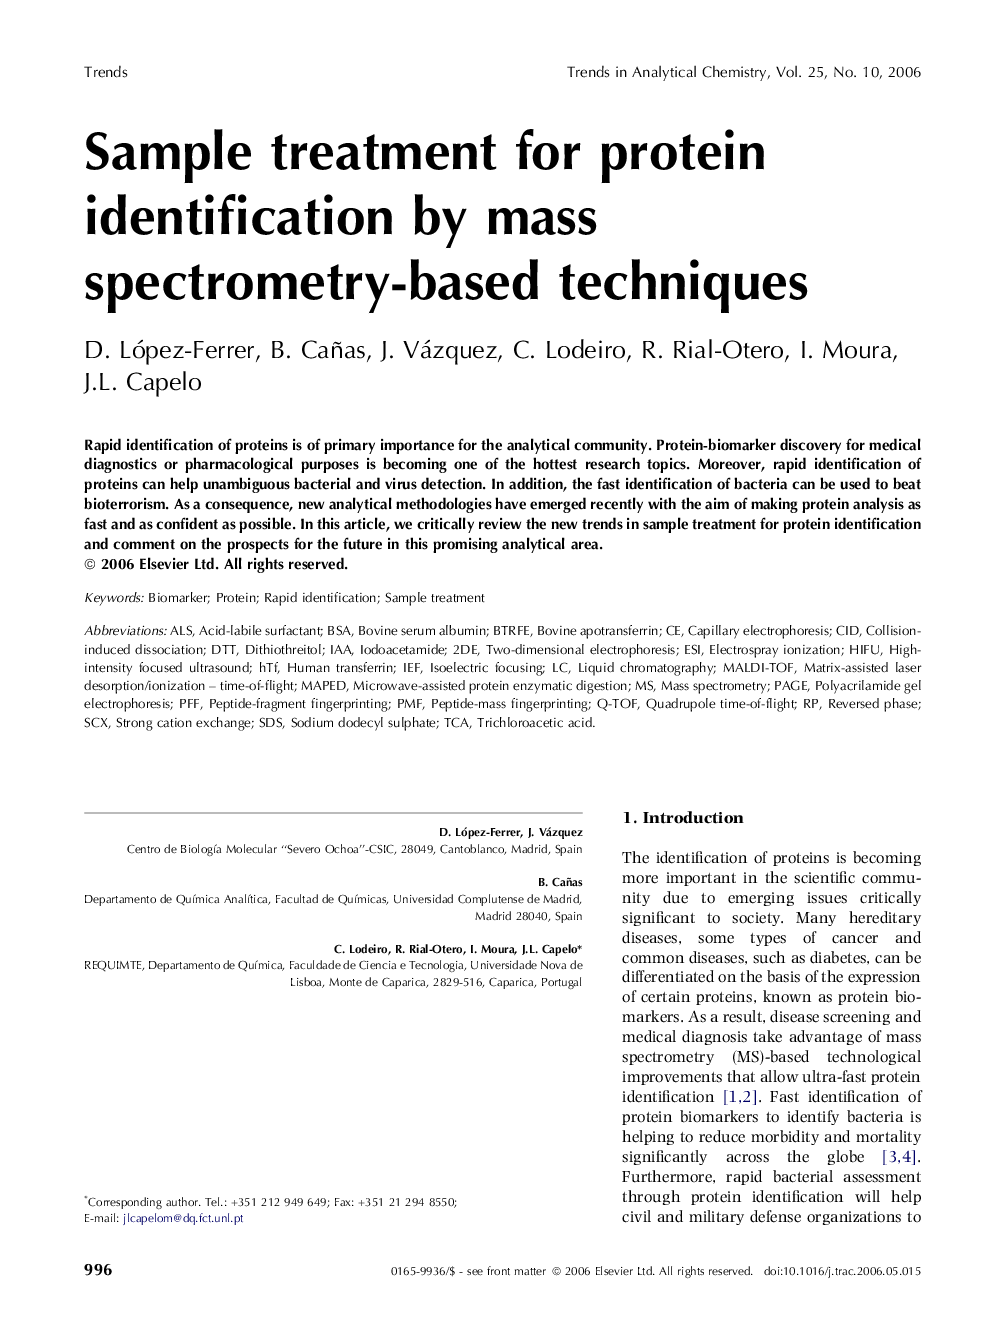 Sample treatment for protein identification by mass spectrometry-based techniques